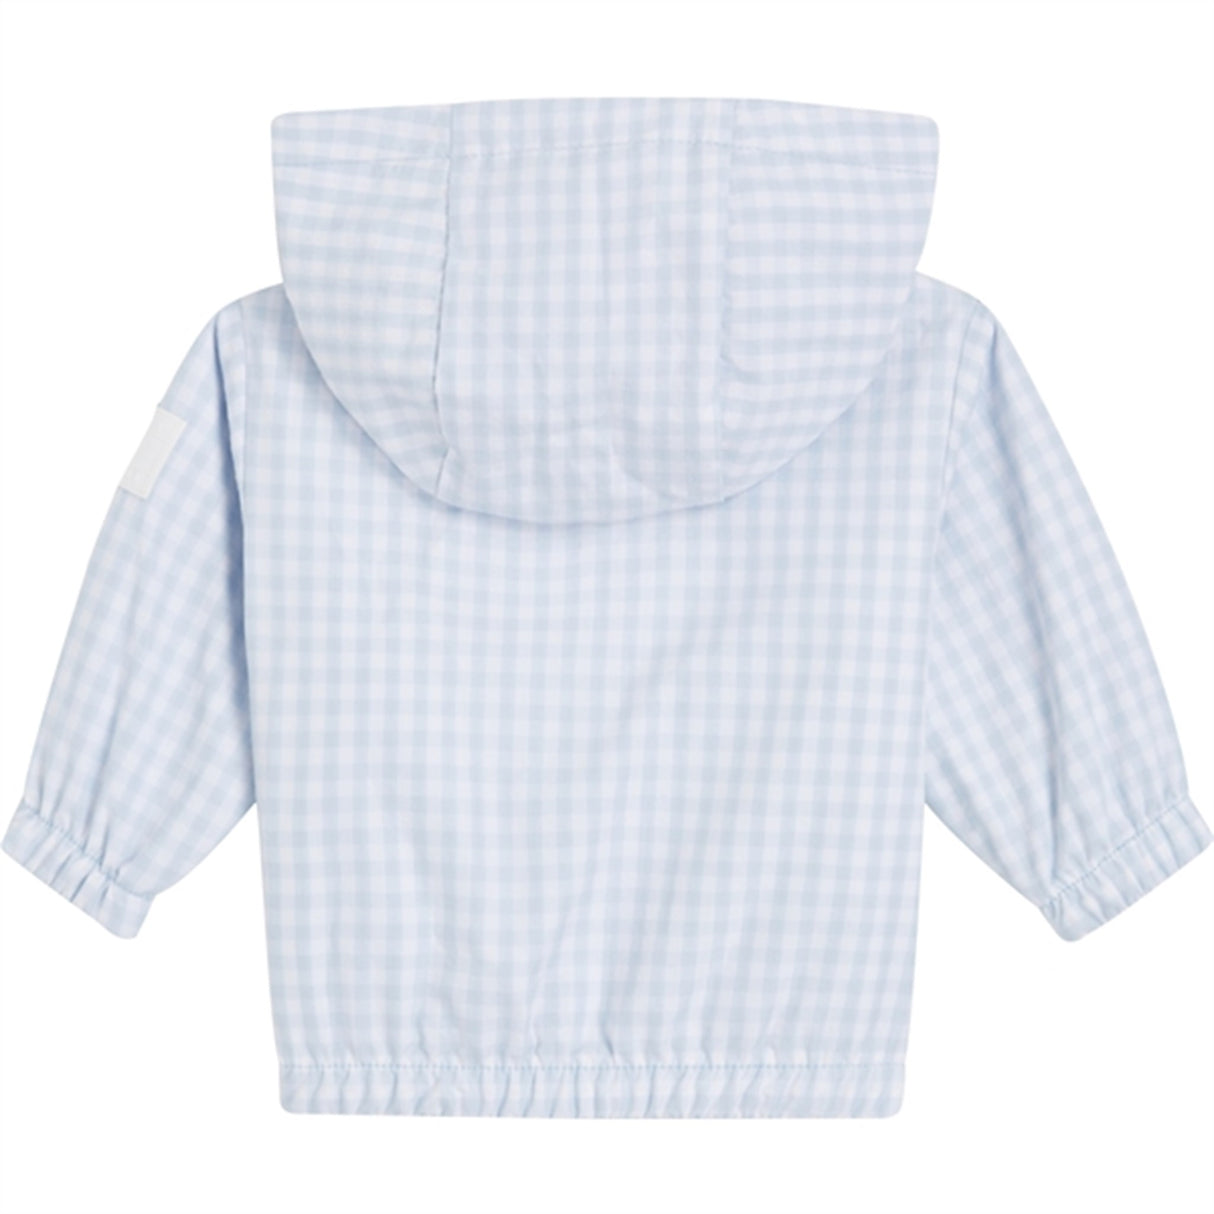 Tommy Hilfiger Baby Reversible Gingham Jacket White / Blue Check 3